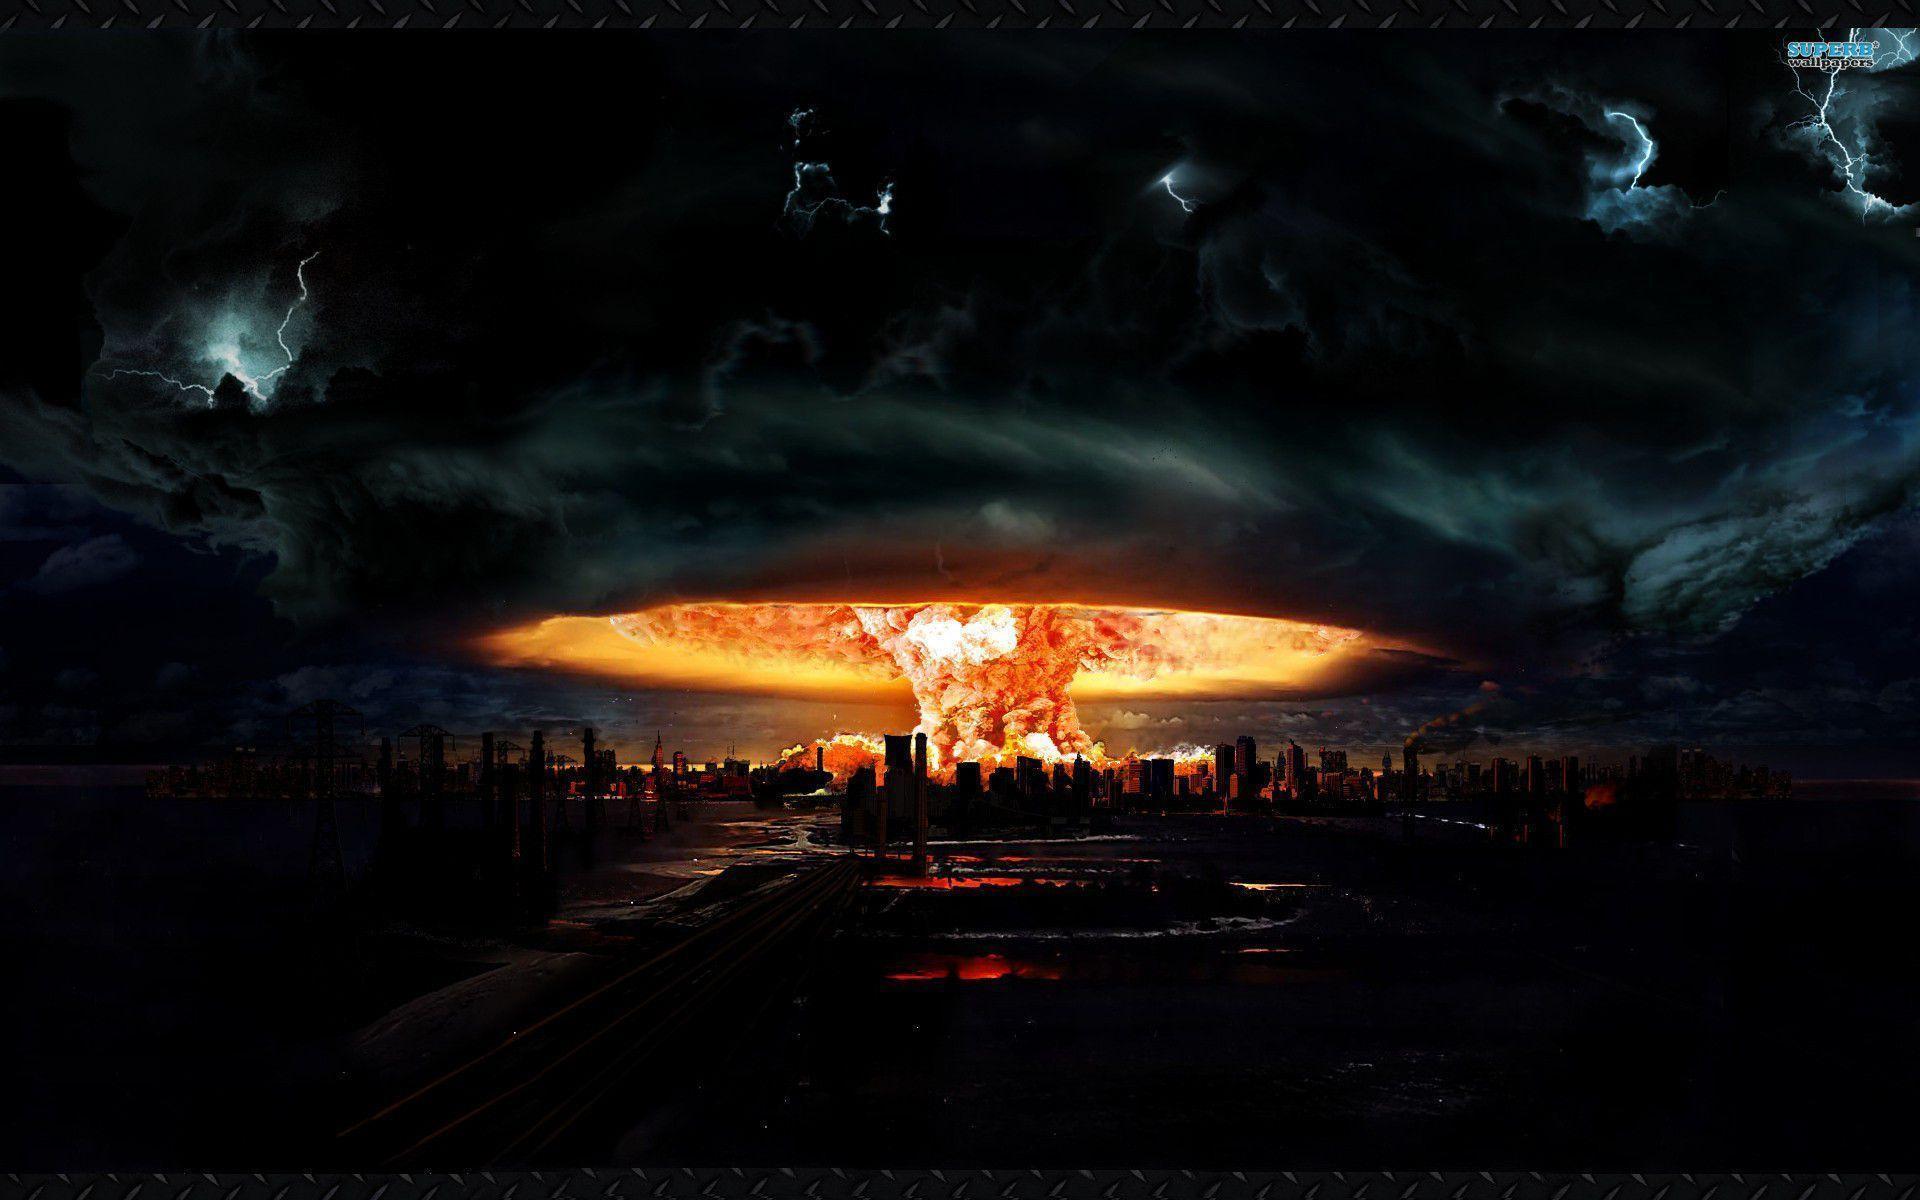 Nuclear Bomb Wallpaper. Nuclear Apocalyptic Wallpaper, Nuclear Bomb Wallpaper and Nuclear Wallpaper High Quality